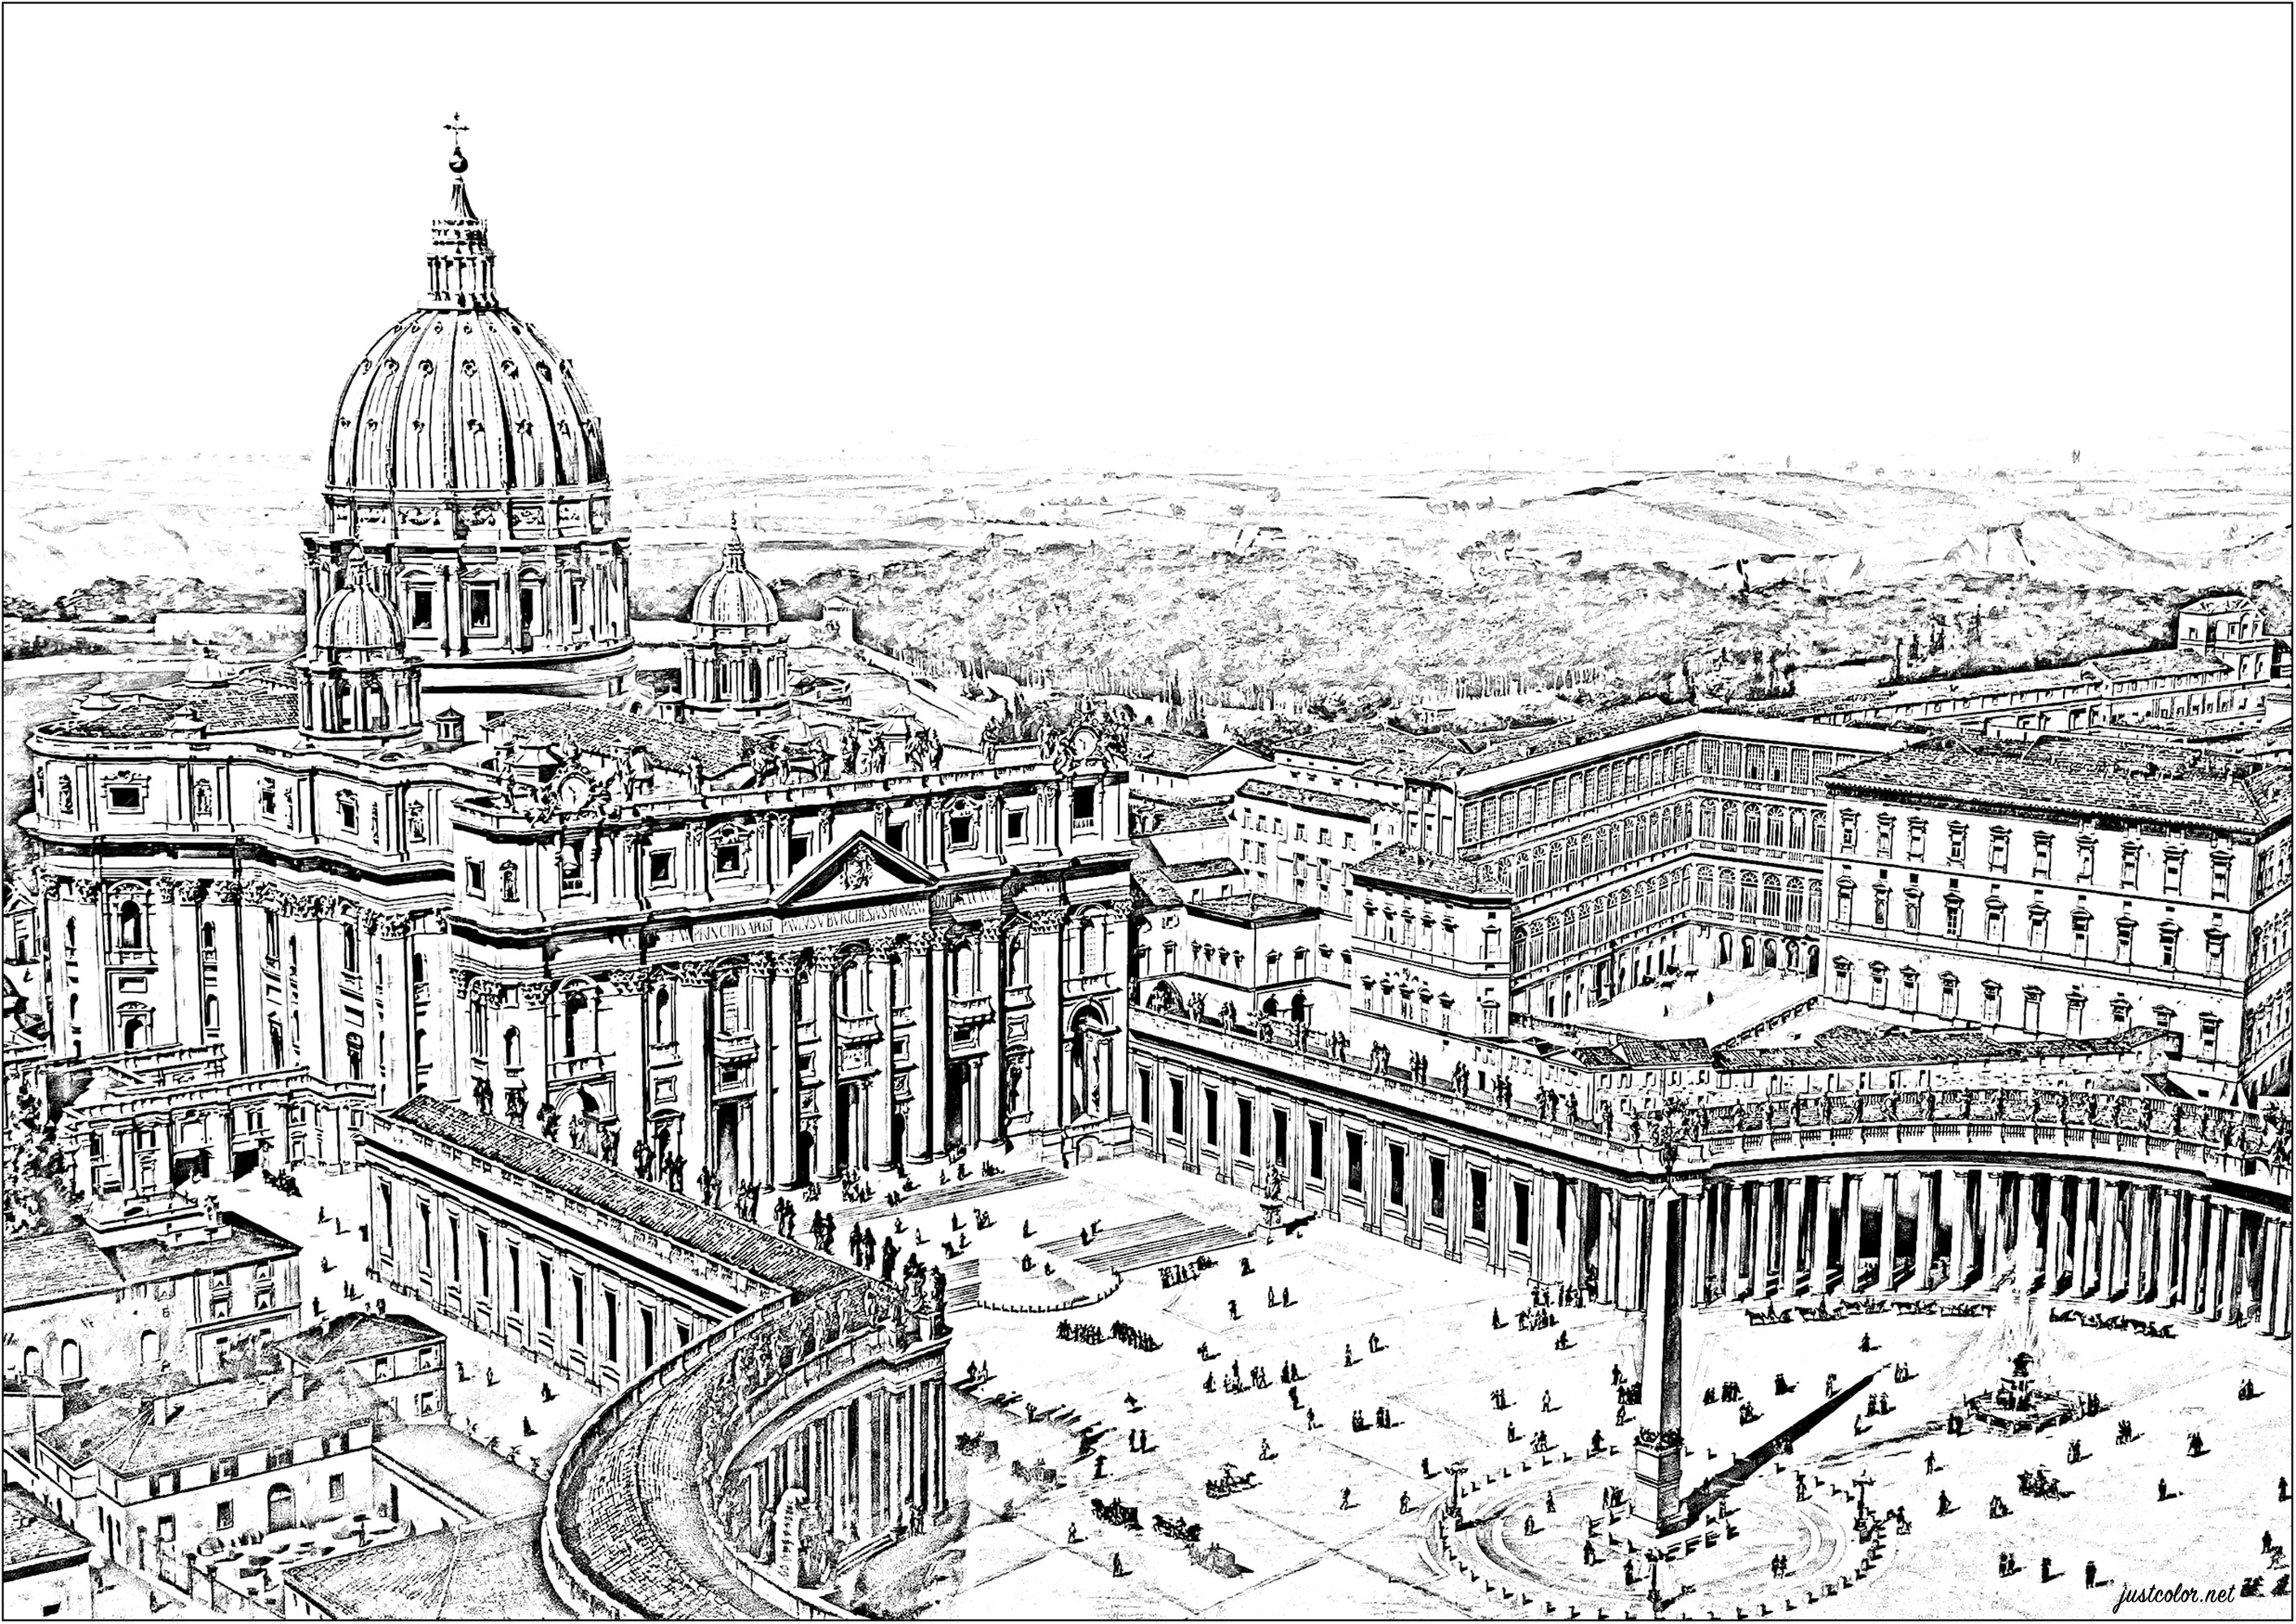 St. Peter's Square in Rome, coloring page based on a 19th-century engraving. St. Peter's Square in Rome, a true architectural masterpiece, has welcomed pilgrims from all over the world since the construction of St. Peter's Basilica began in 1506. It is encircled by the elegant arms of Bernini's colonnade.